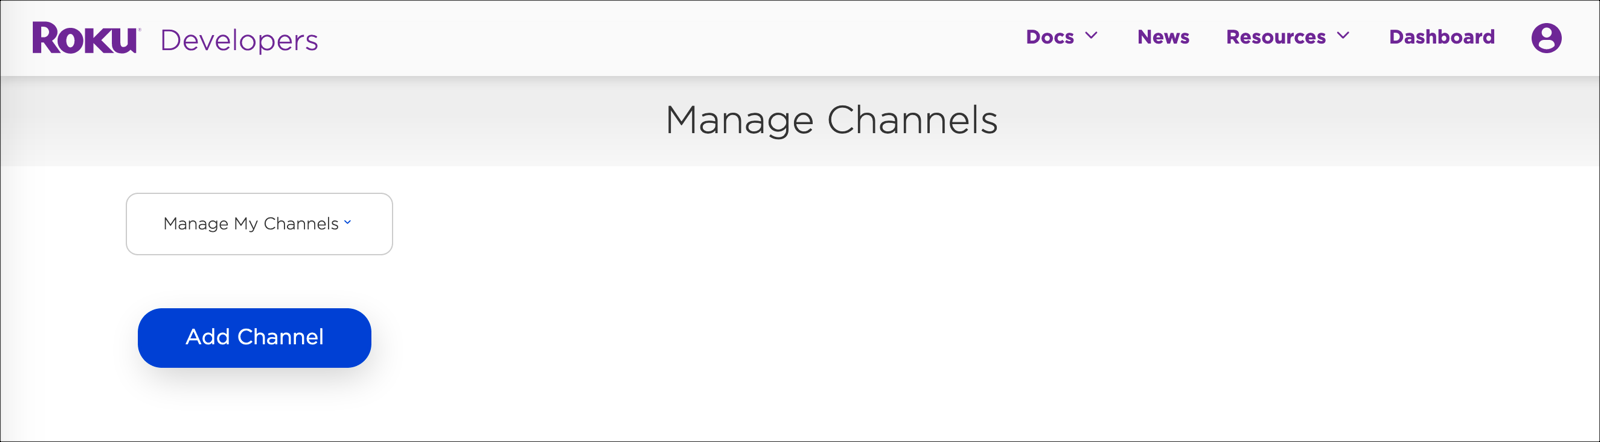 Manage Channels